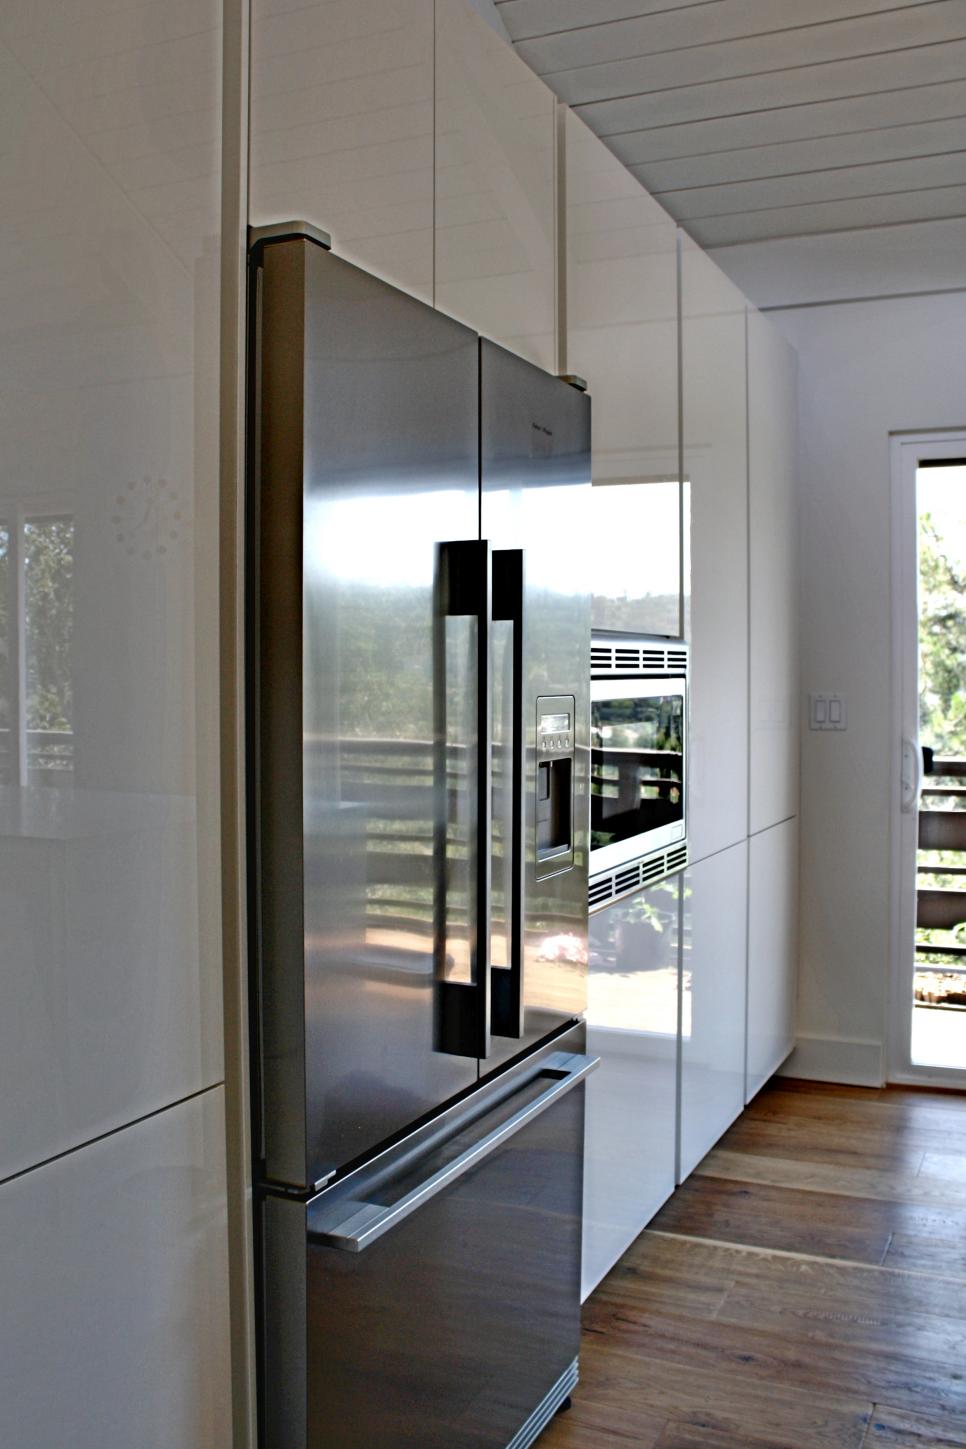 Stainless Refrigerator and Sleek Cabinets in Modern ...